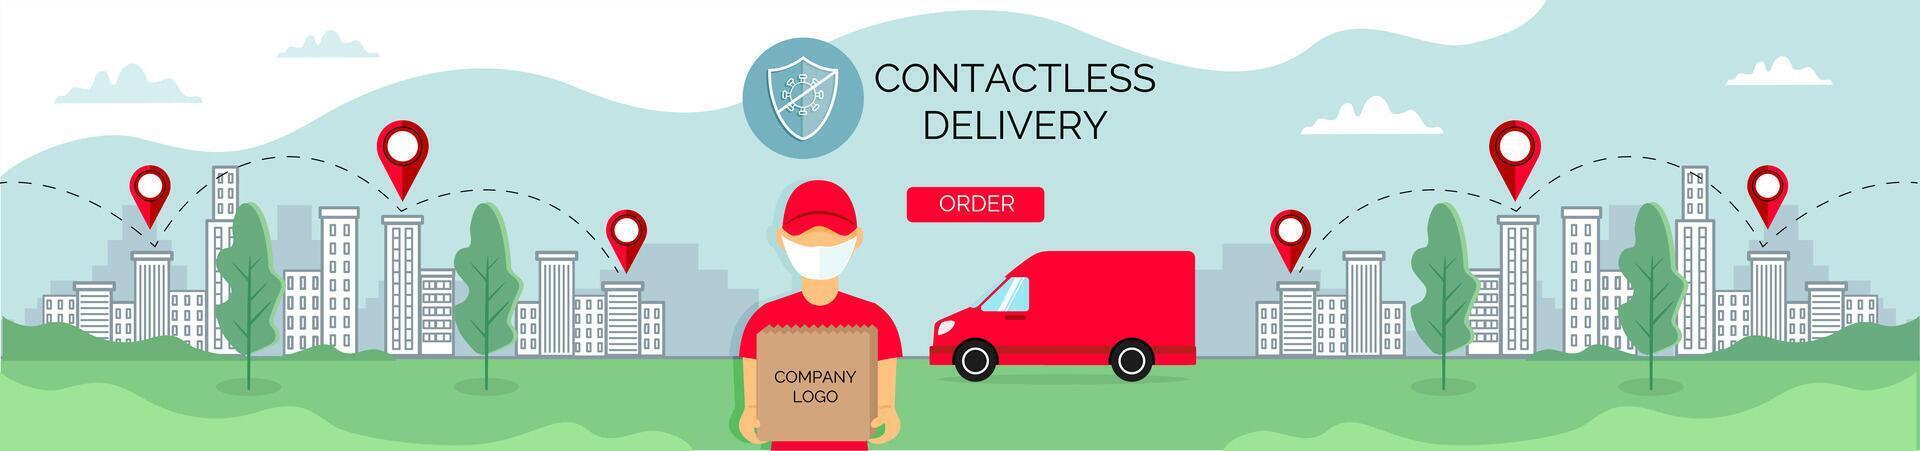 Safe contactless delivery horizontal banner .eps vector